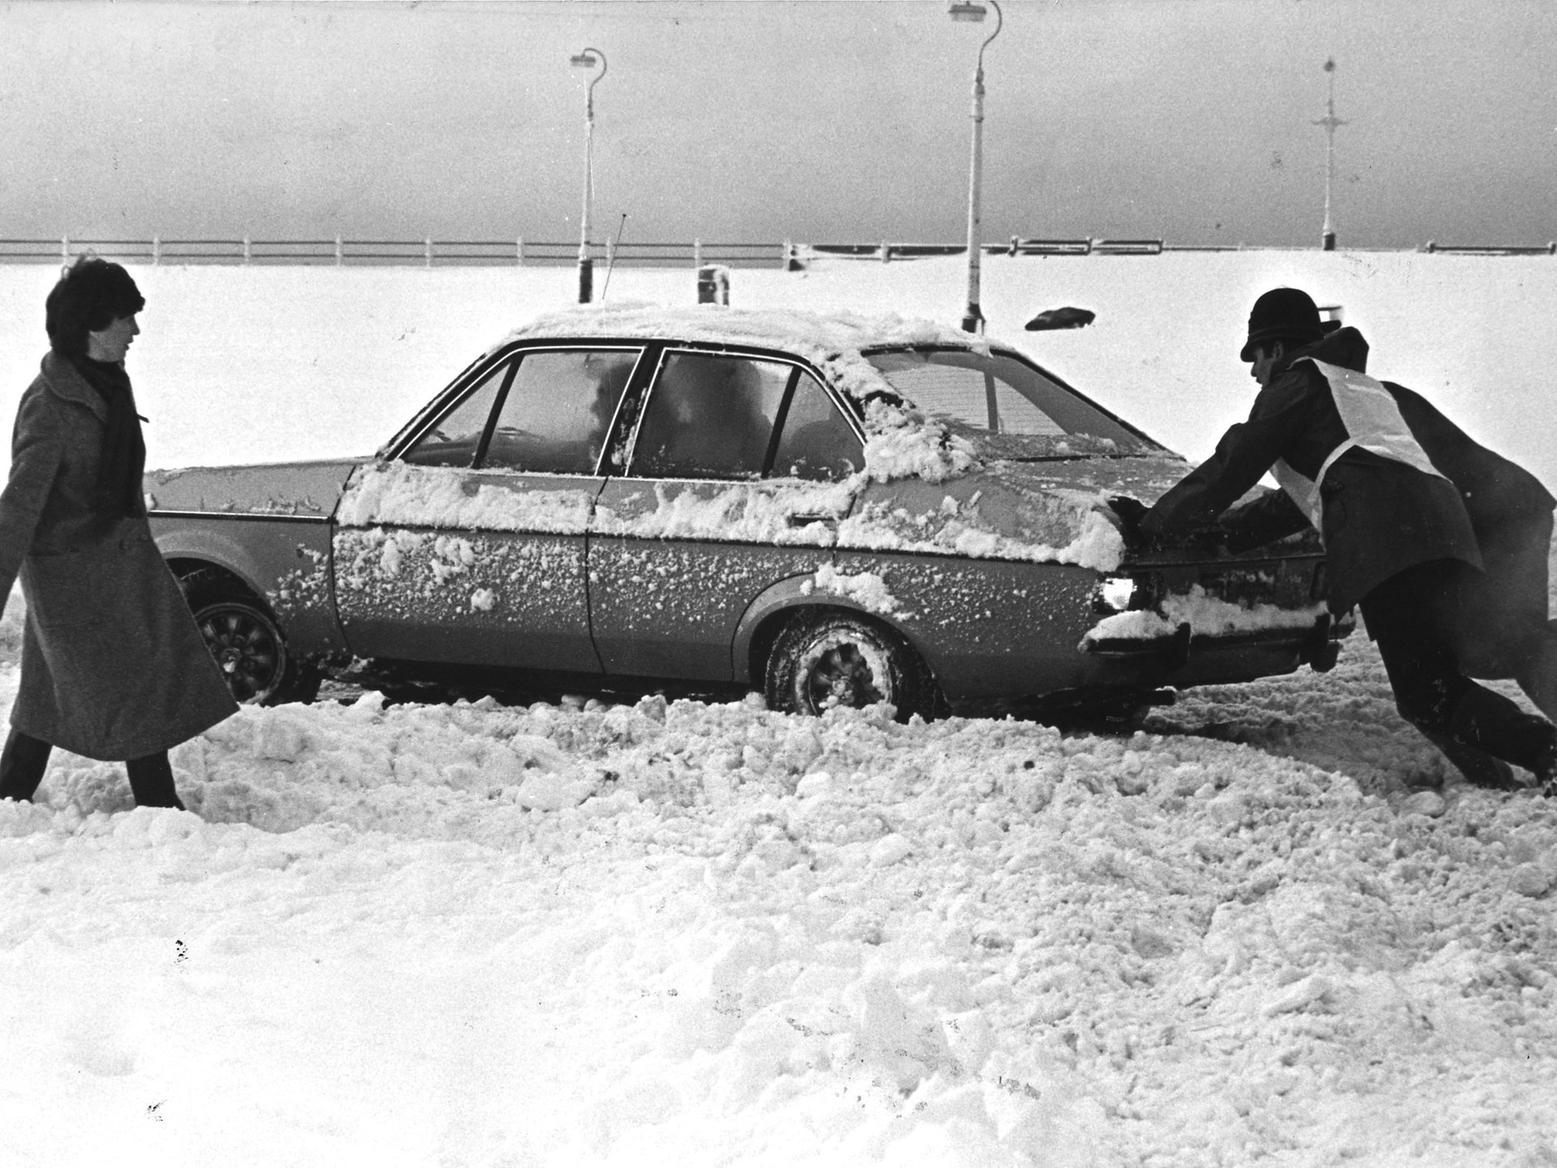 A car is pushed out of the snow on the promenade